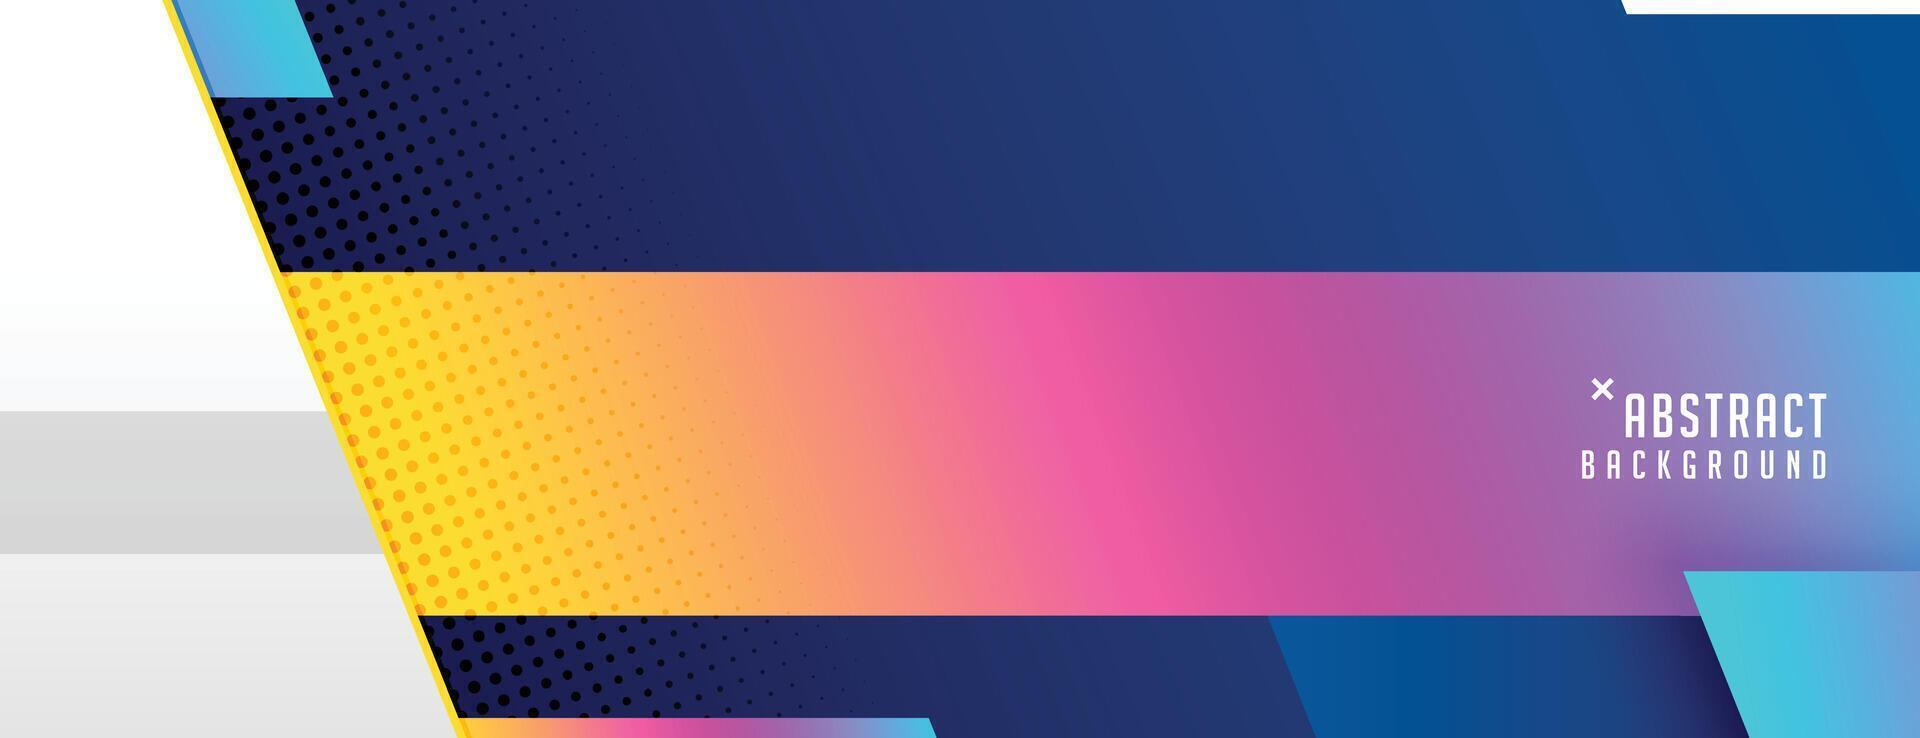 gradient abstract banner with geometric shapes design vector